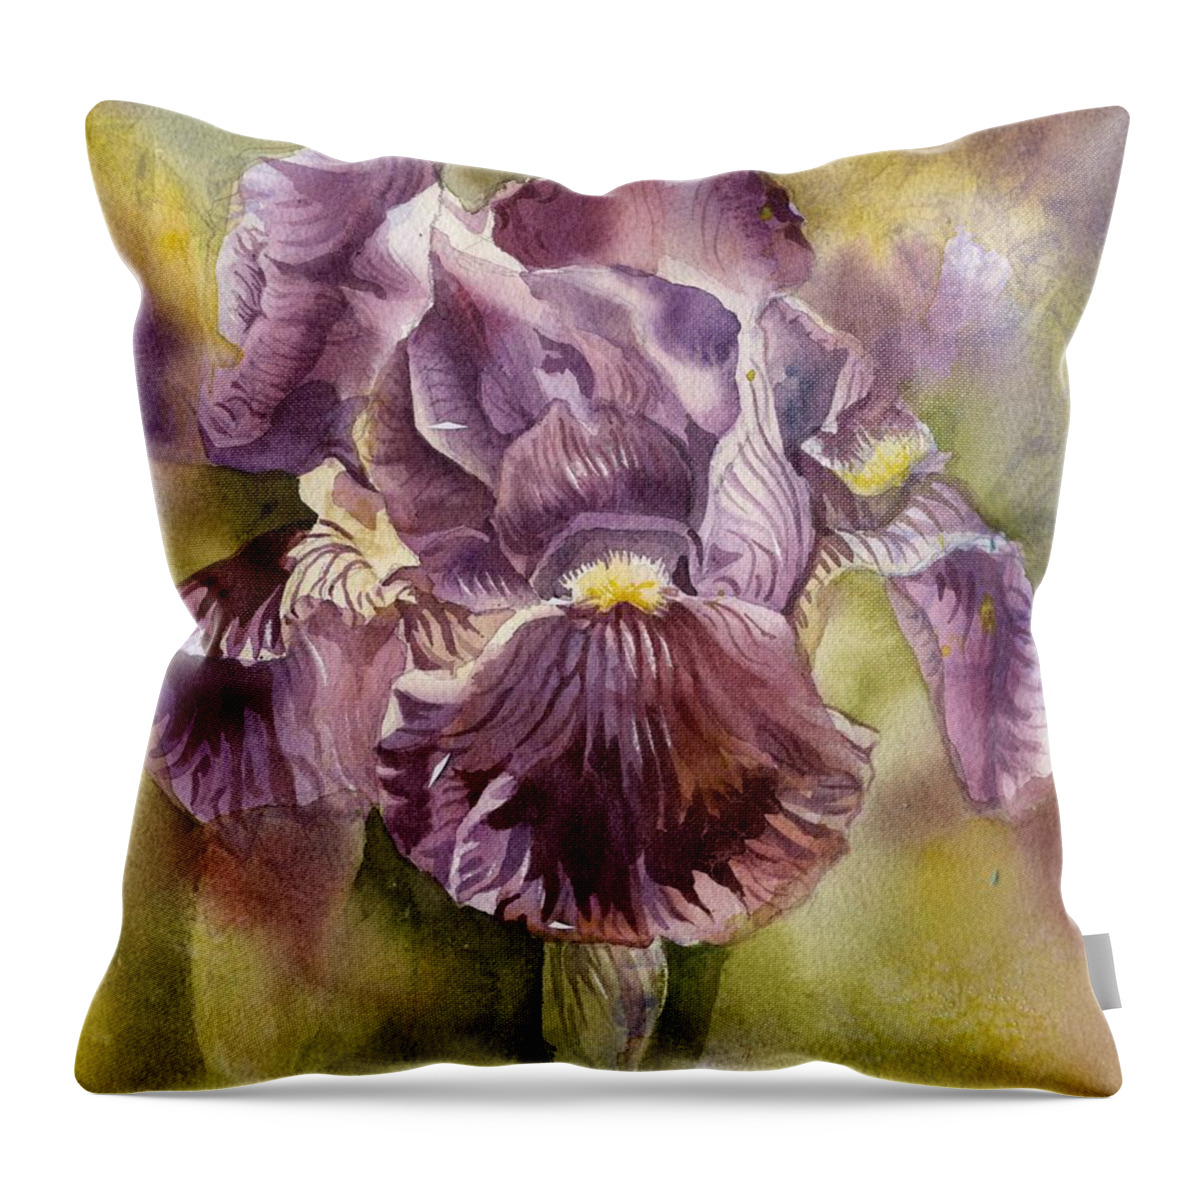 Iris In Purple Throw Pillow featuring the painting Iris In Purple by Alfred Ng